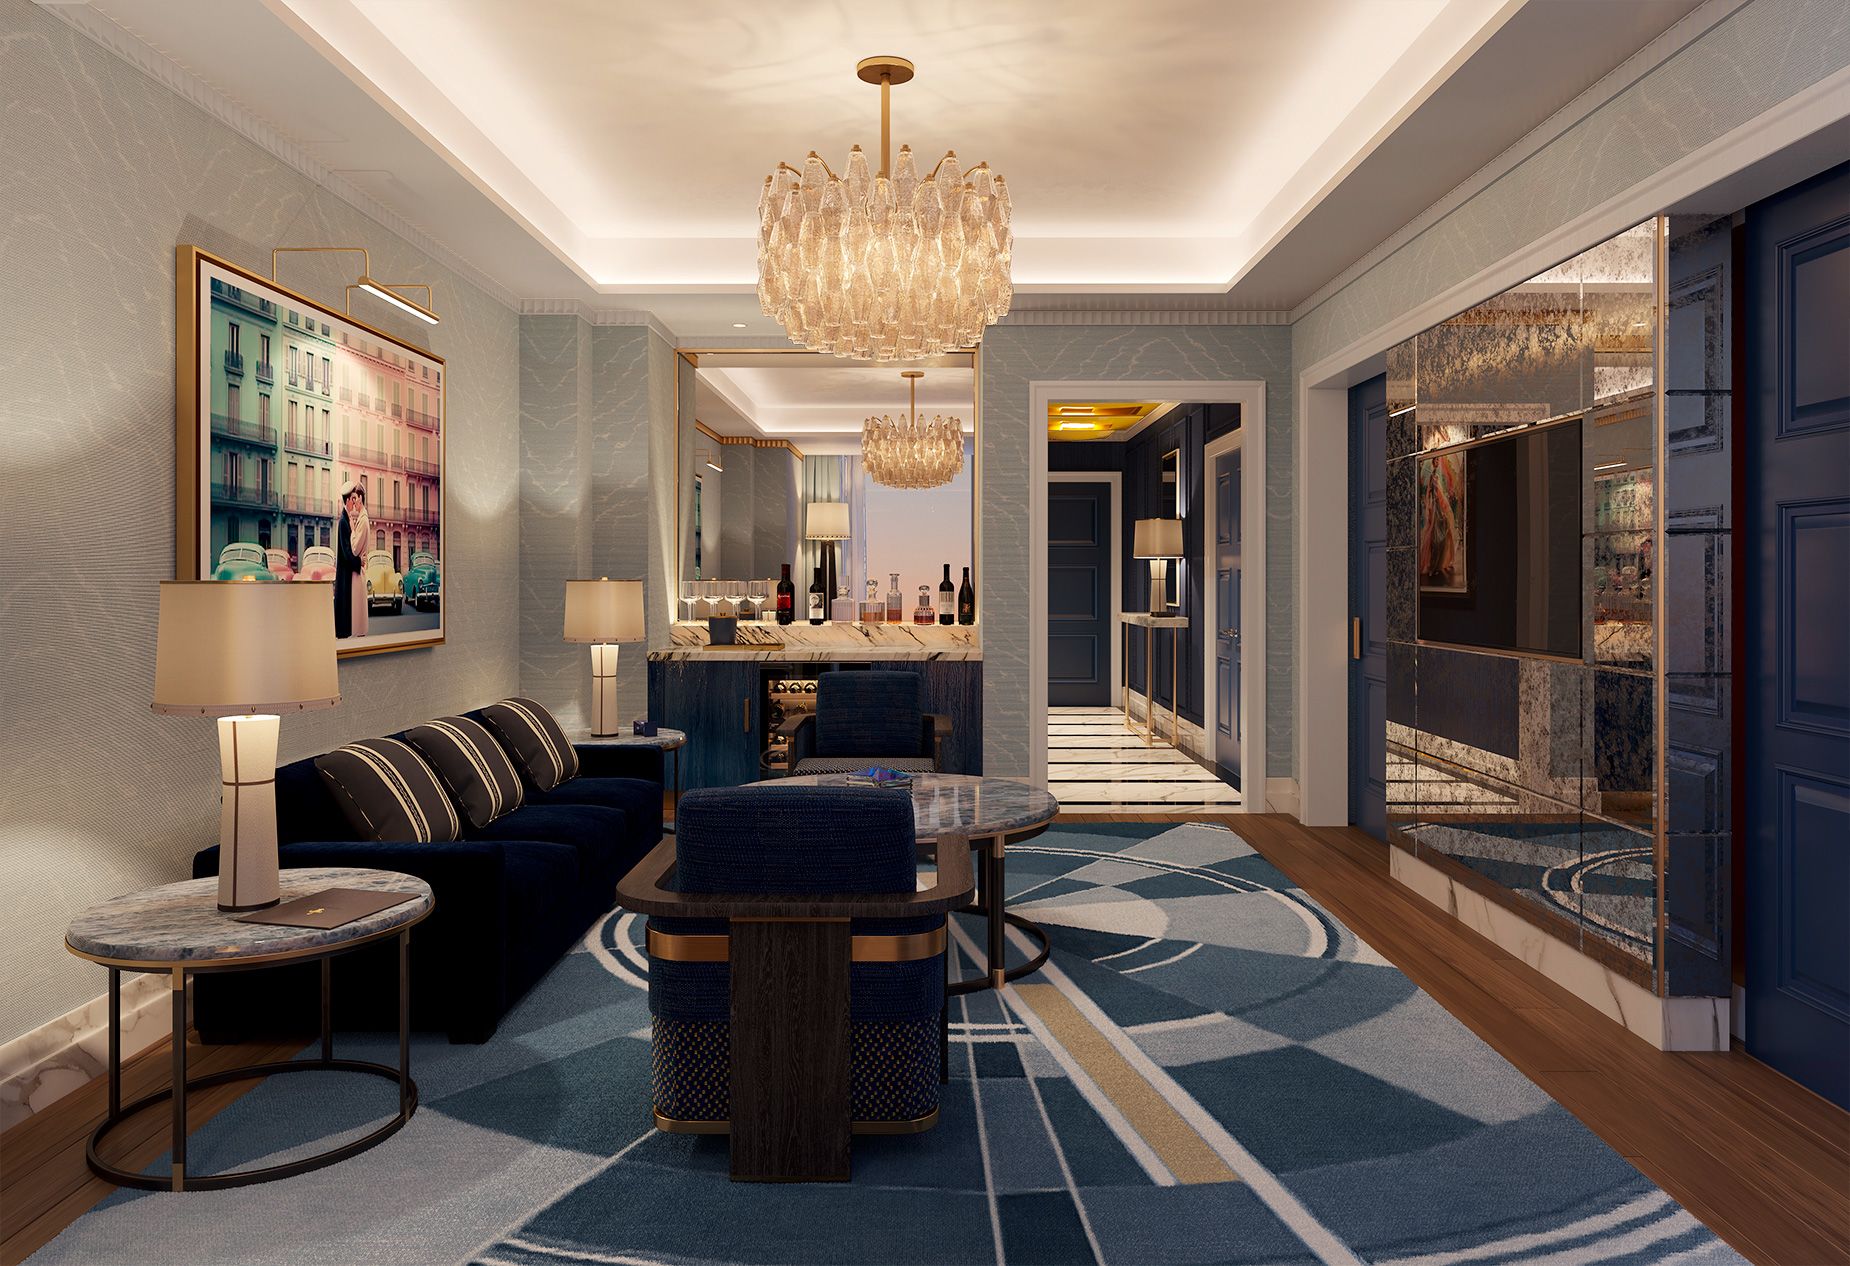 A rendering of the Fontainebleau Las Vegas' Monogram Suite shows off high style for high-rollers.